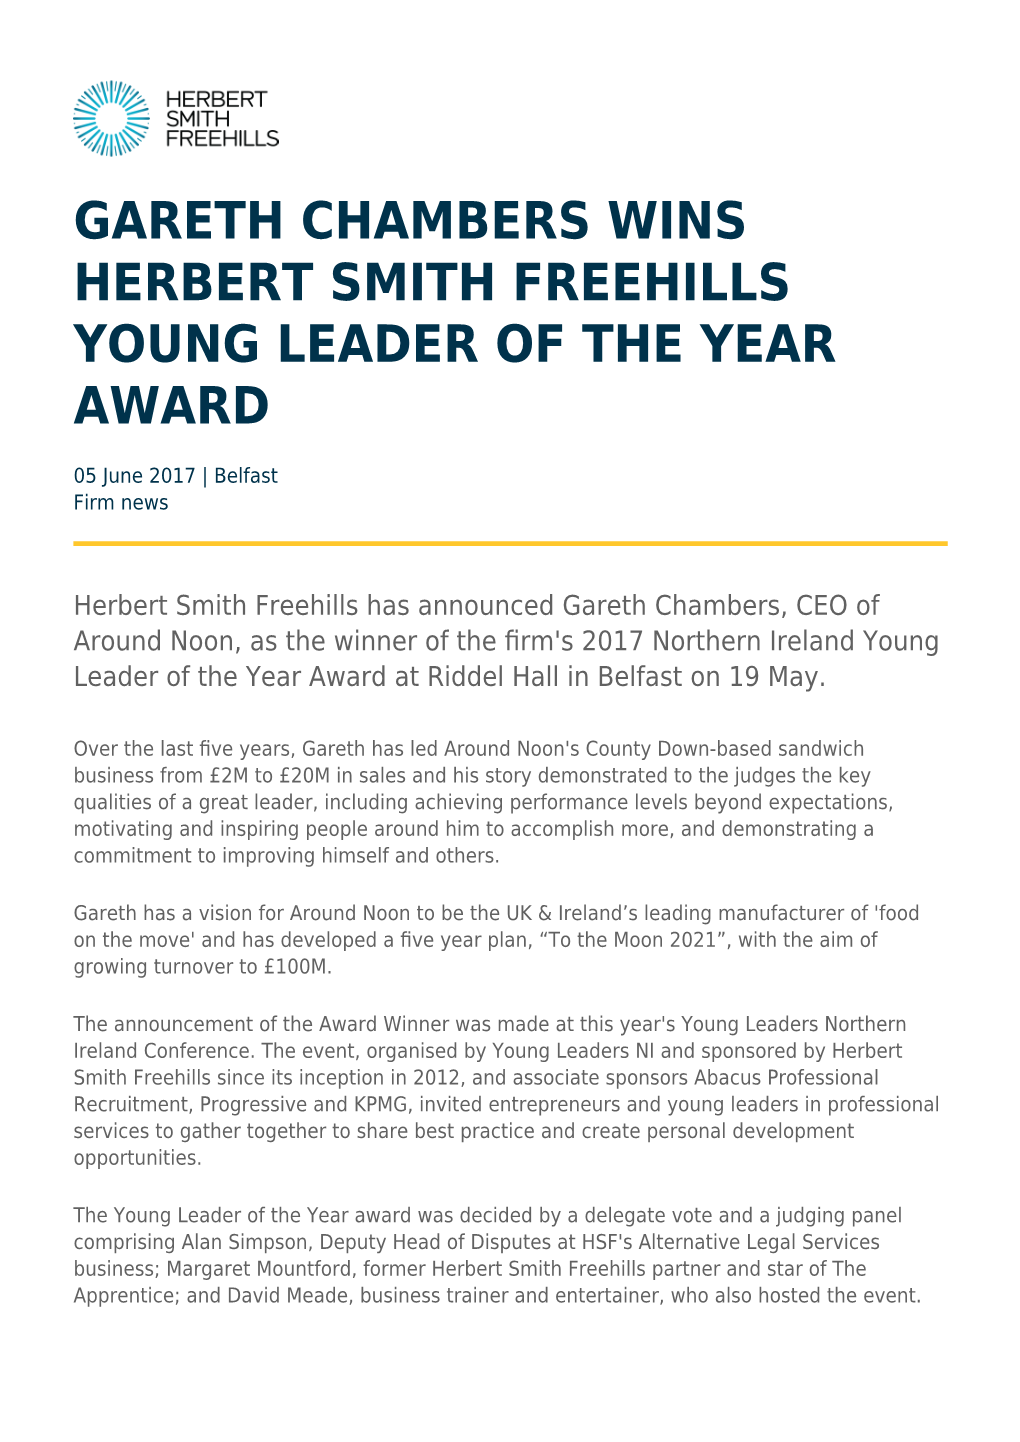 Gareth Chambers Wins Herbert Smith Freehills Young Leader of the Year Award